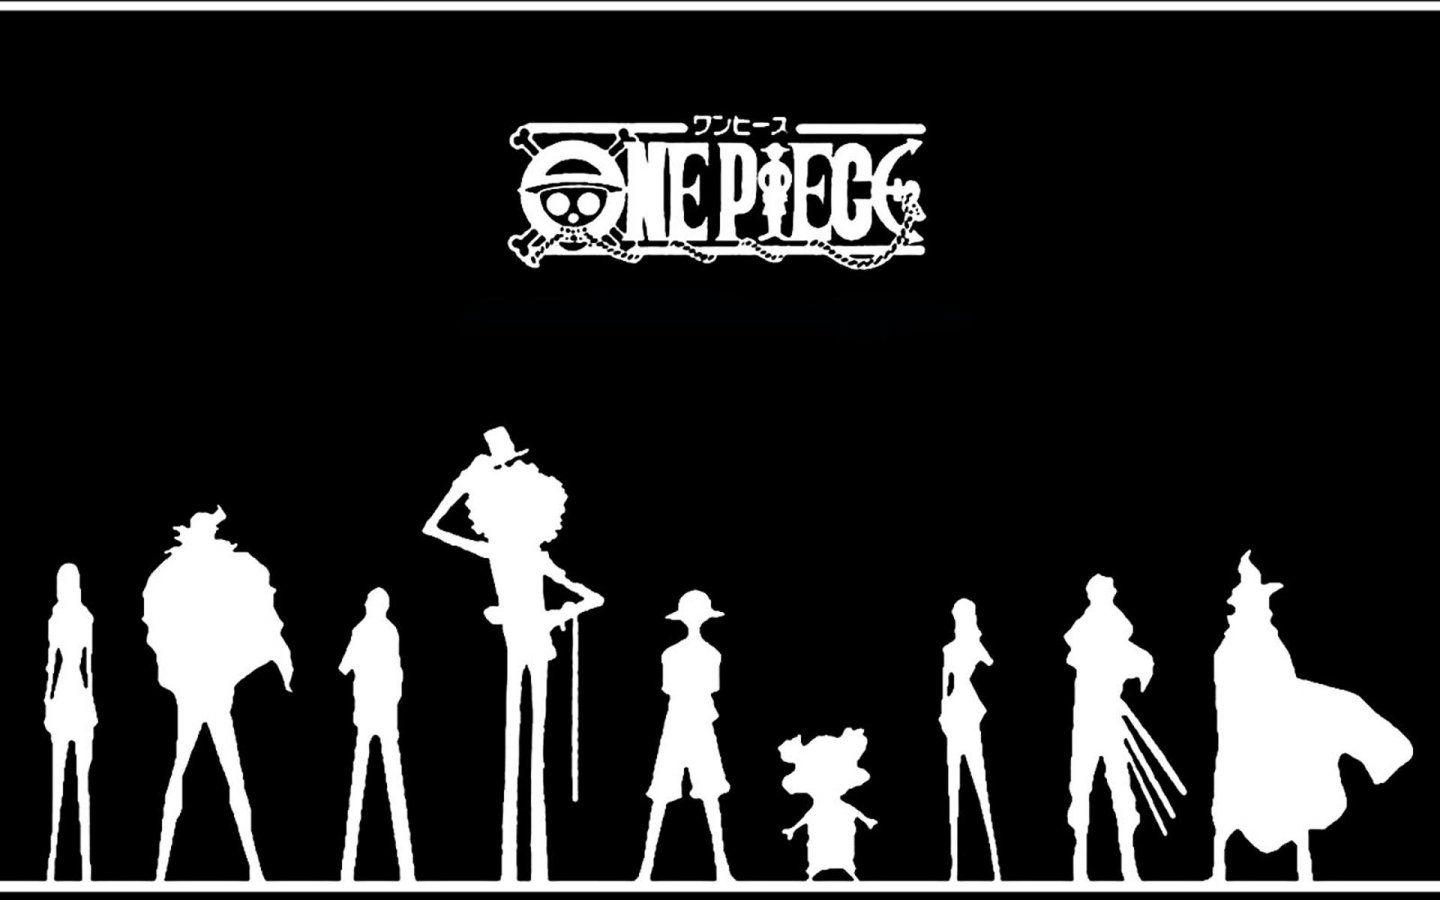 So I noticed something in the One Piece logo : r/OnePiece